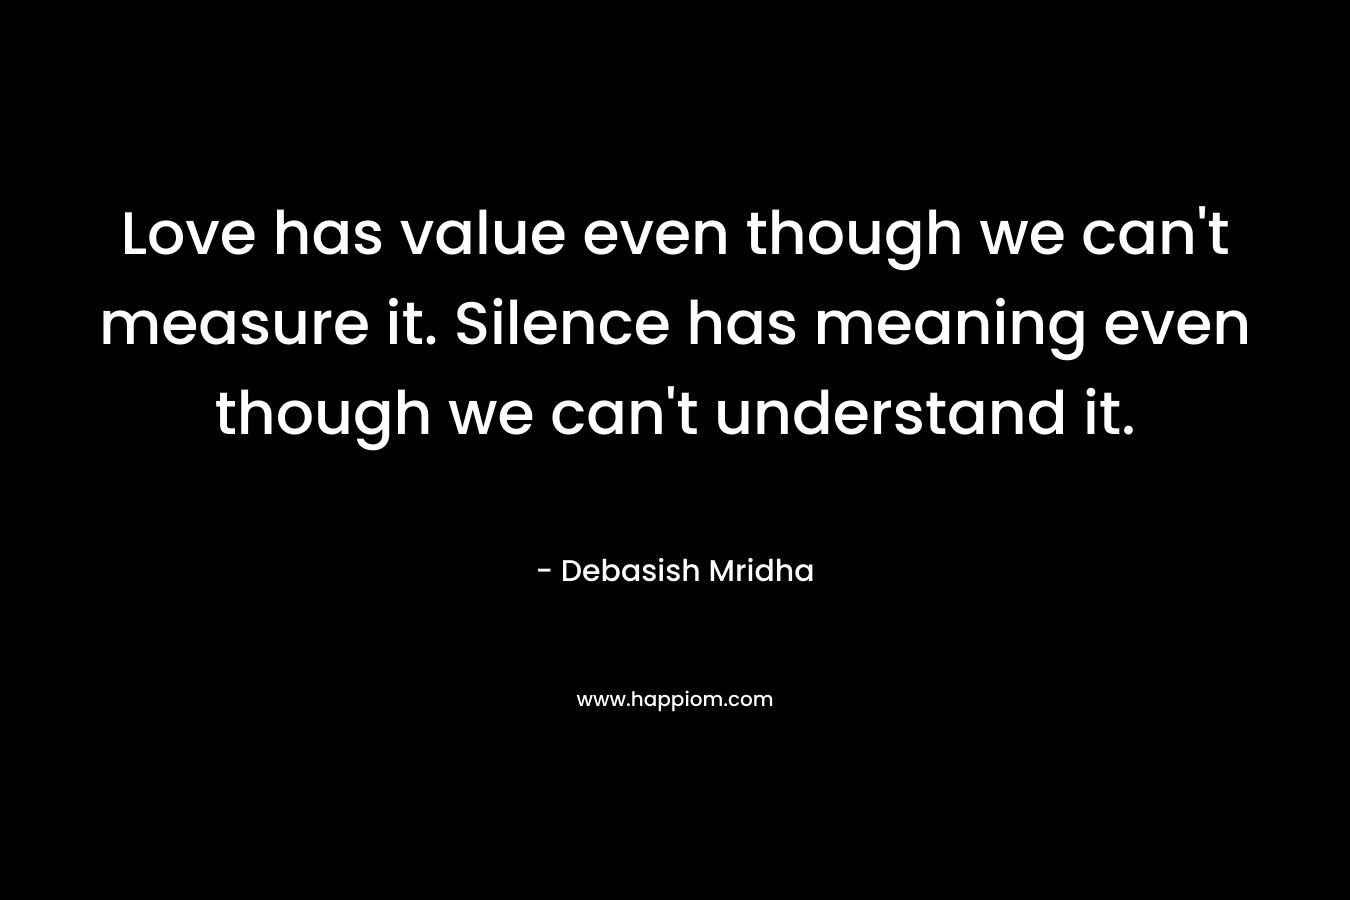 Love has value even though we can't measure it. Silence has meaning even though we can't understand it.